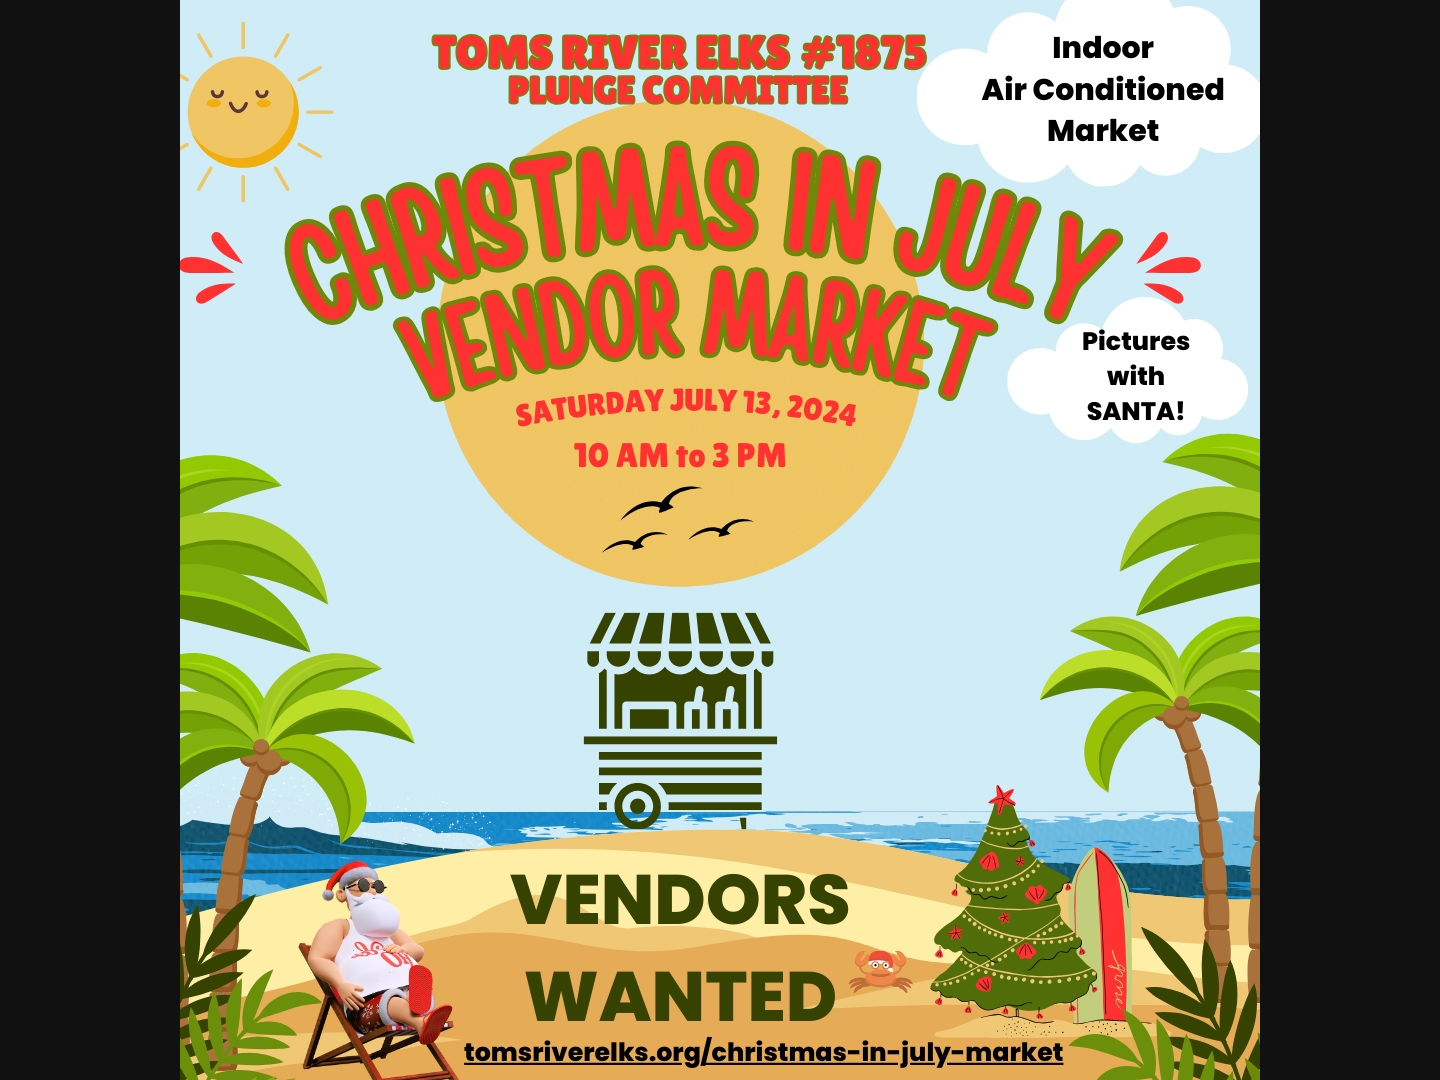 Toms River Elks invites local vendors to apply to participate in this indoor event. Santa and a professional photographer will be there!